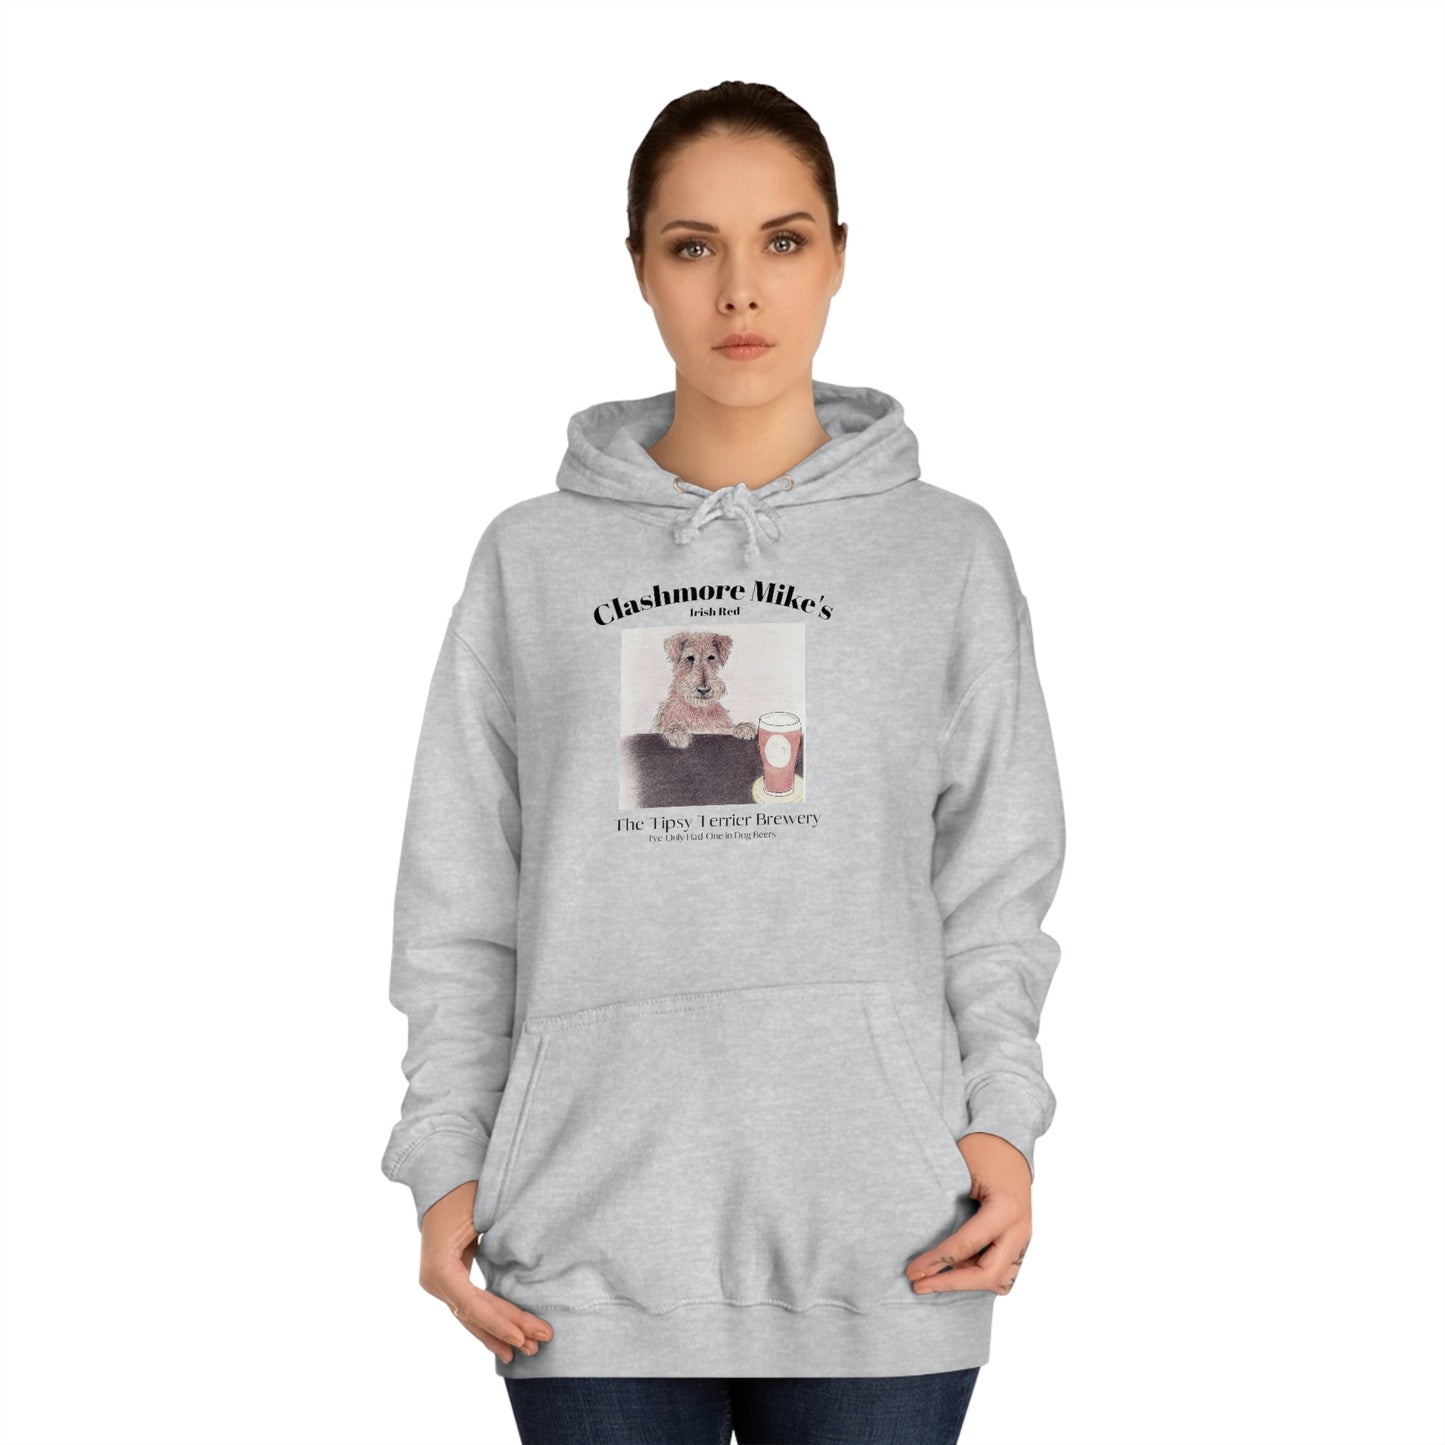 Tipsy Terrier Clashmore Mike's Hoodie